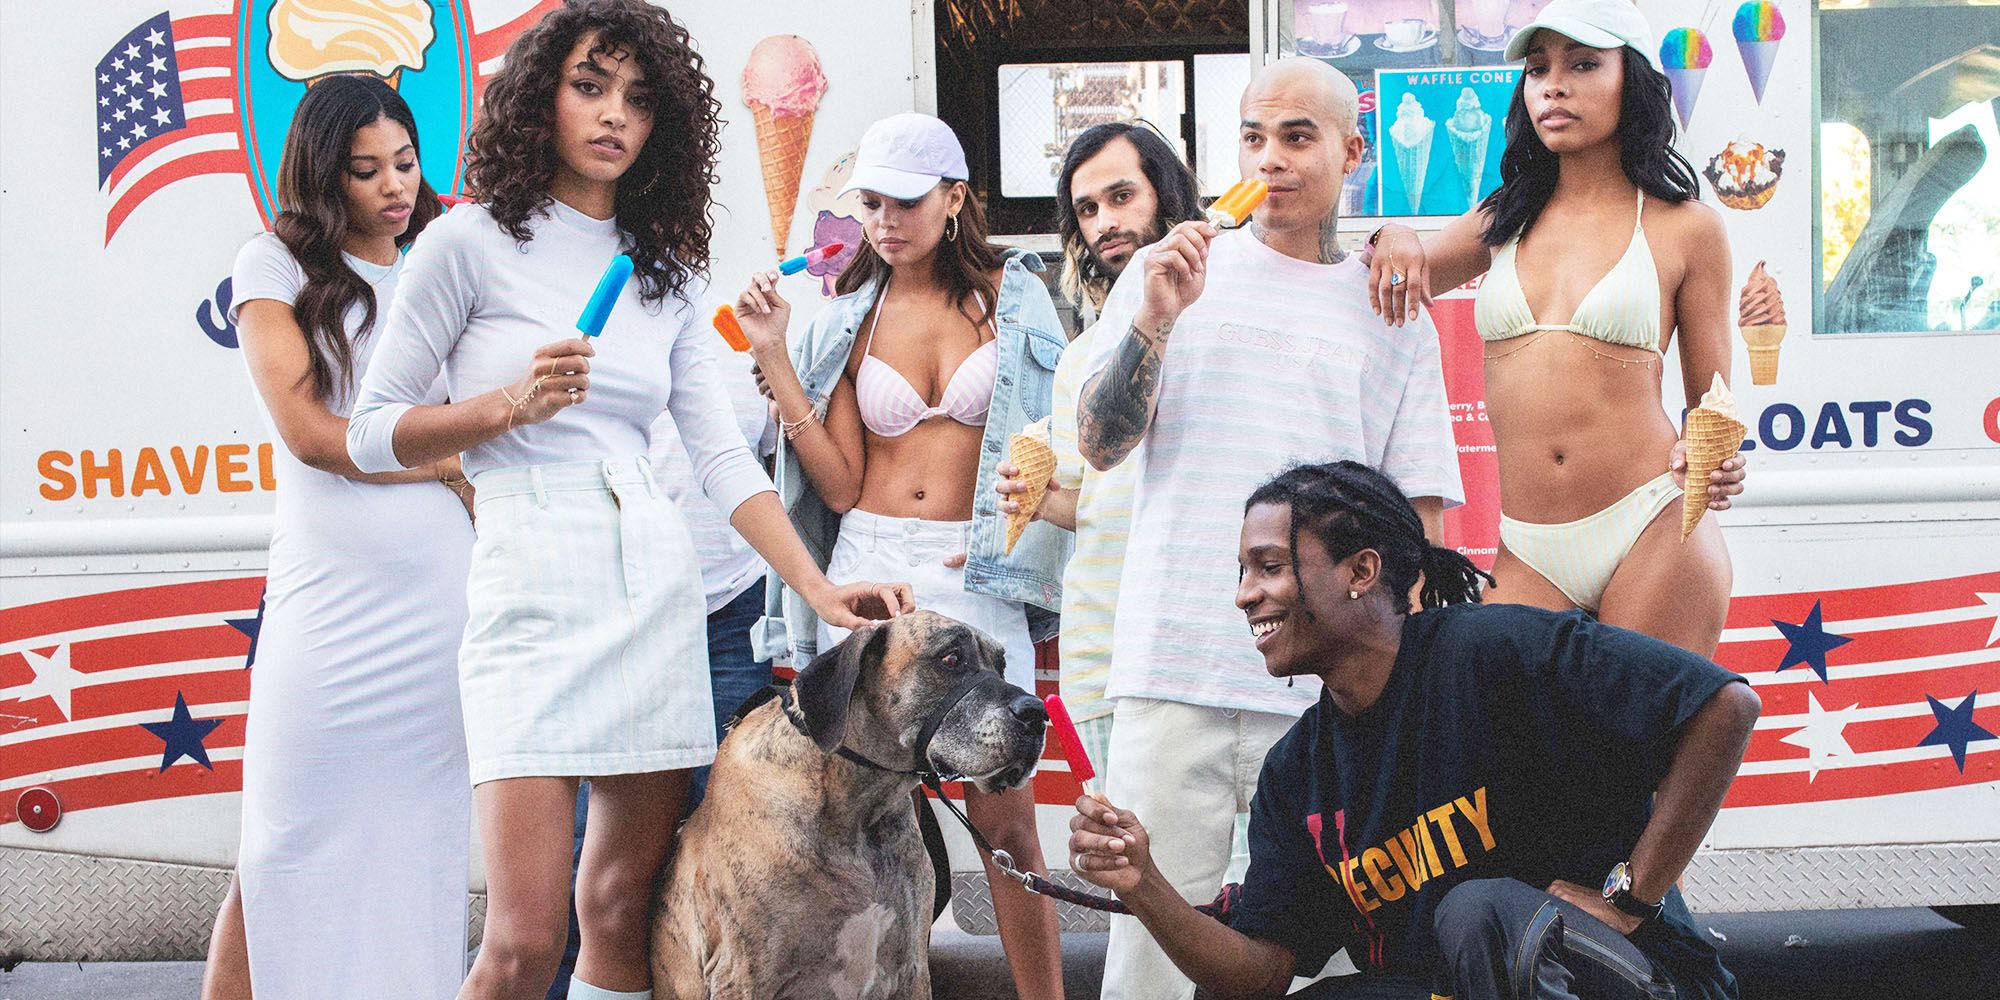 A$AP Rocky Talks GUESS Club - See the Campaign Images from A$AP Rocky's GUESS Capsule